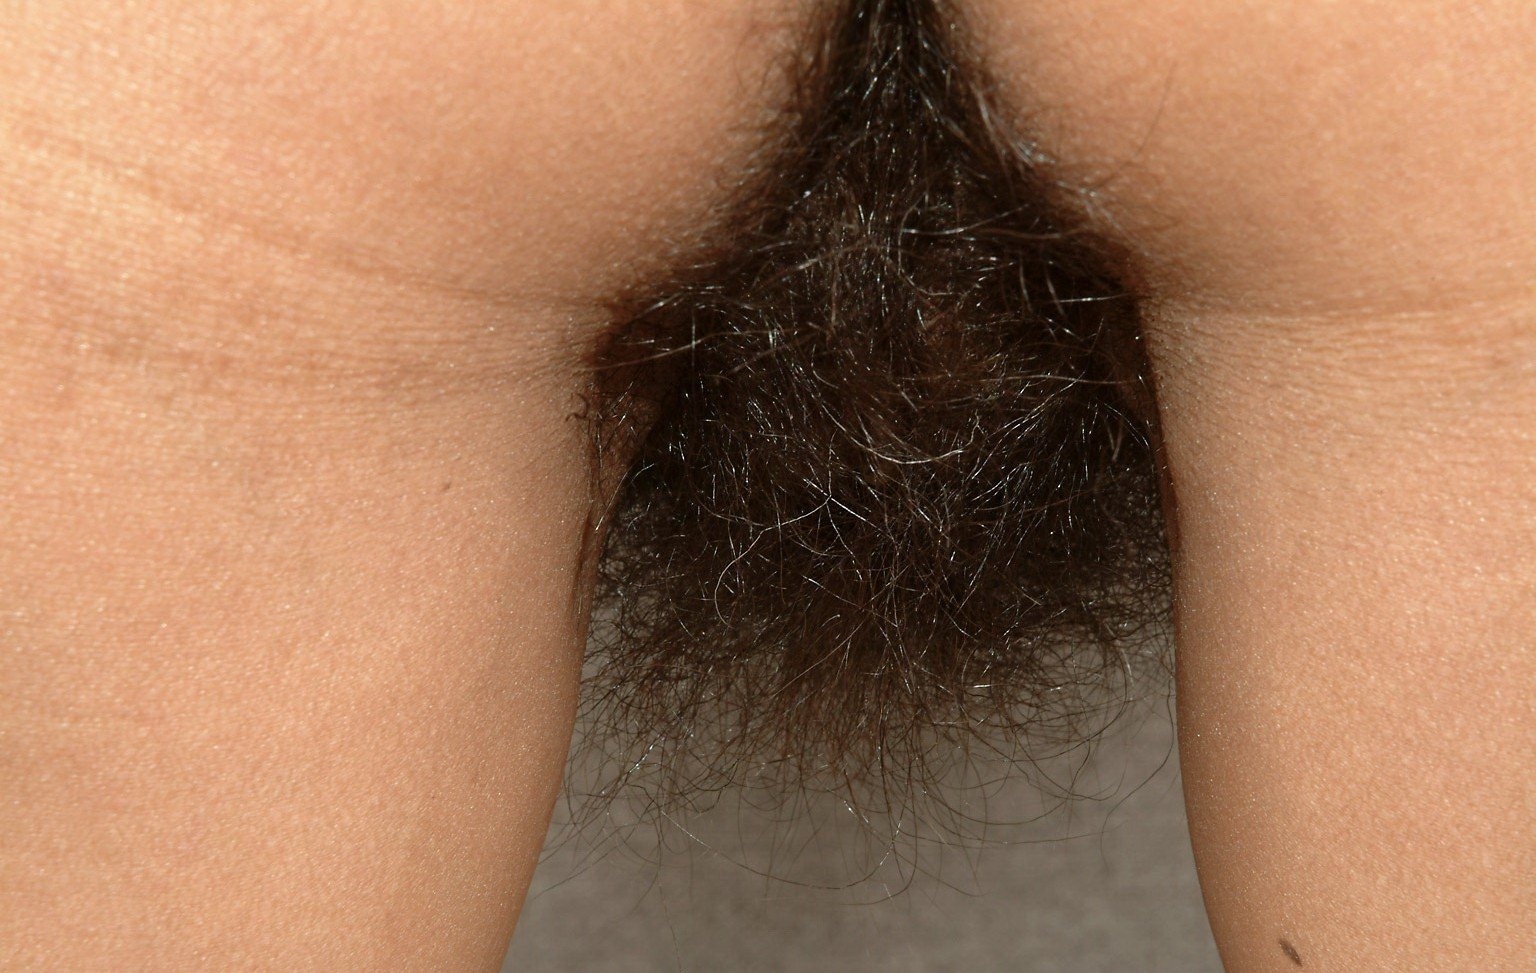 https://xhamster.monster/uploads/posts/2023-04/1682137145_xhamster-monster-p-porn-a-very-beautiful-woman-with-a-hairy-p-4.jpg